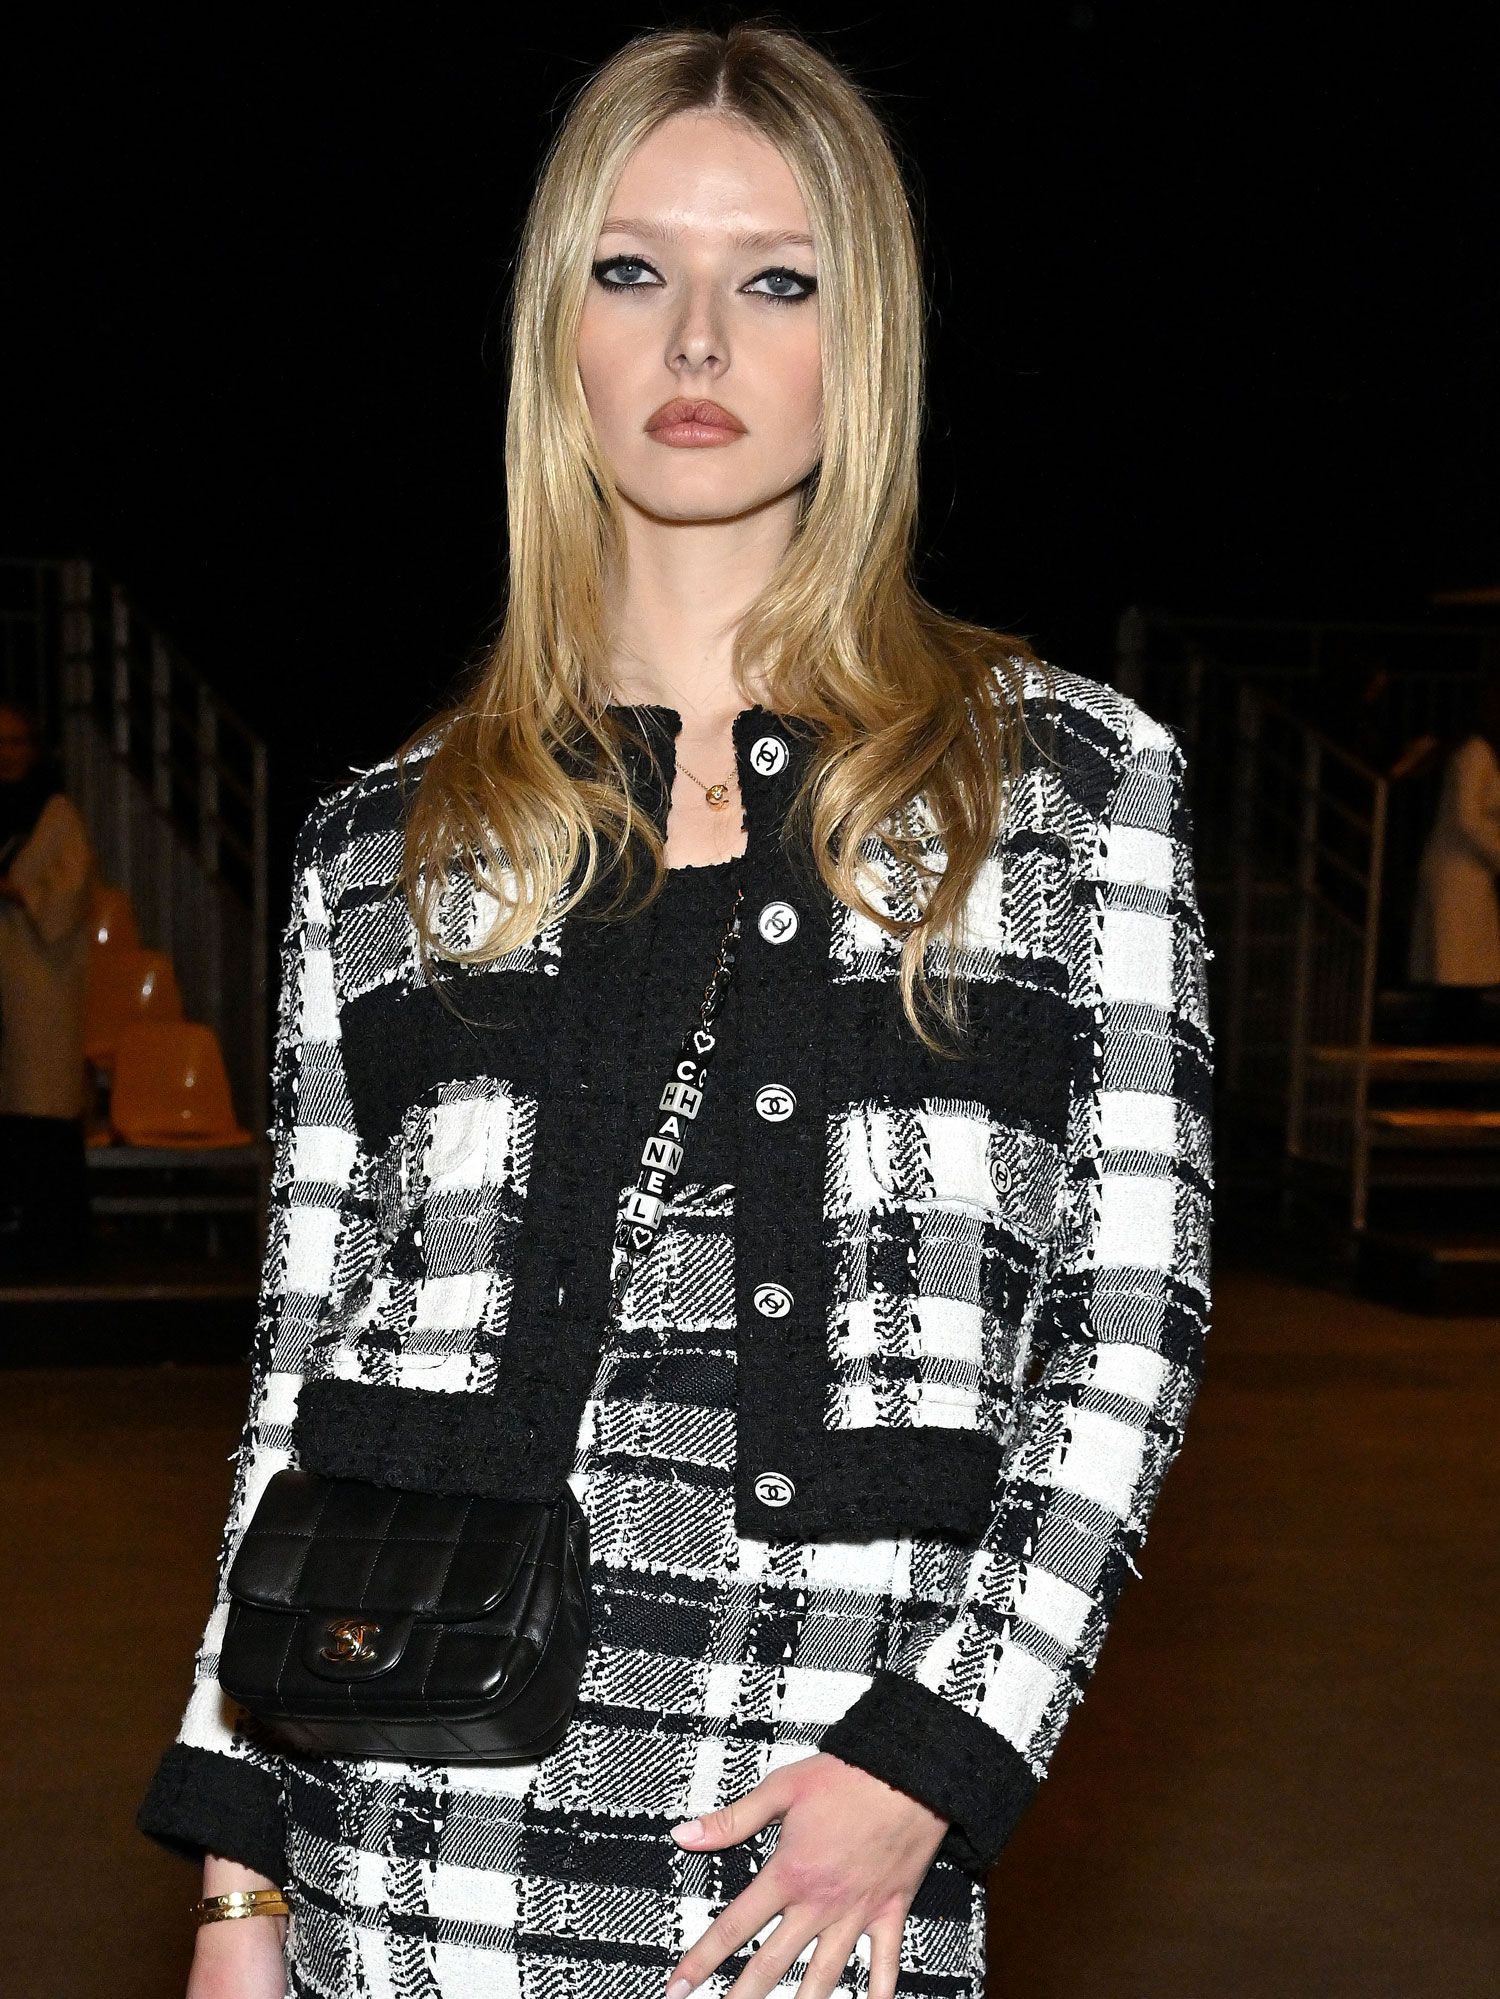 Apple Martin Looked Like Gwyneth Paltrow's Twin at the Chanel Couture Show